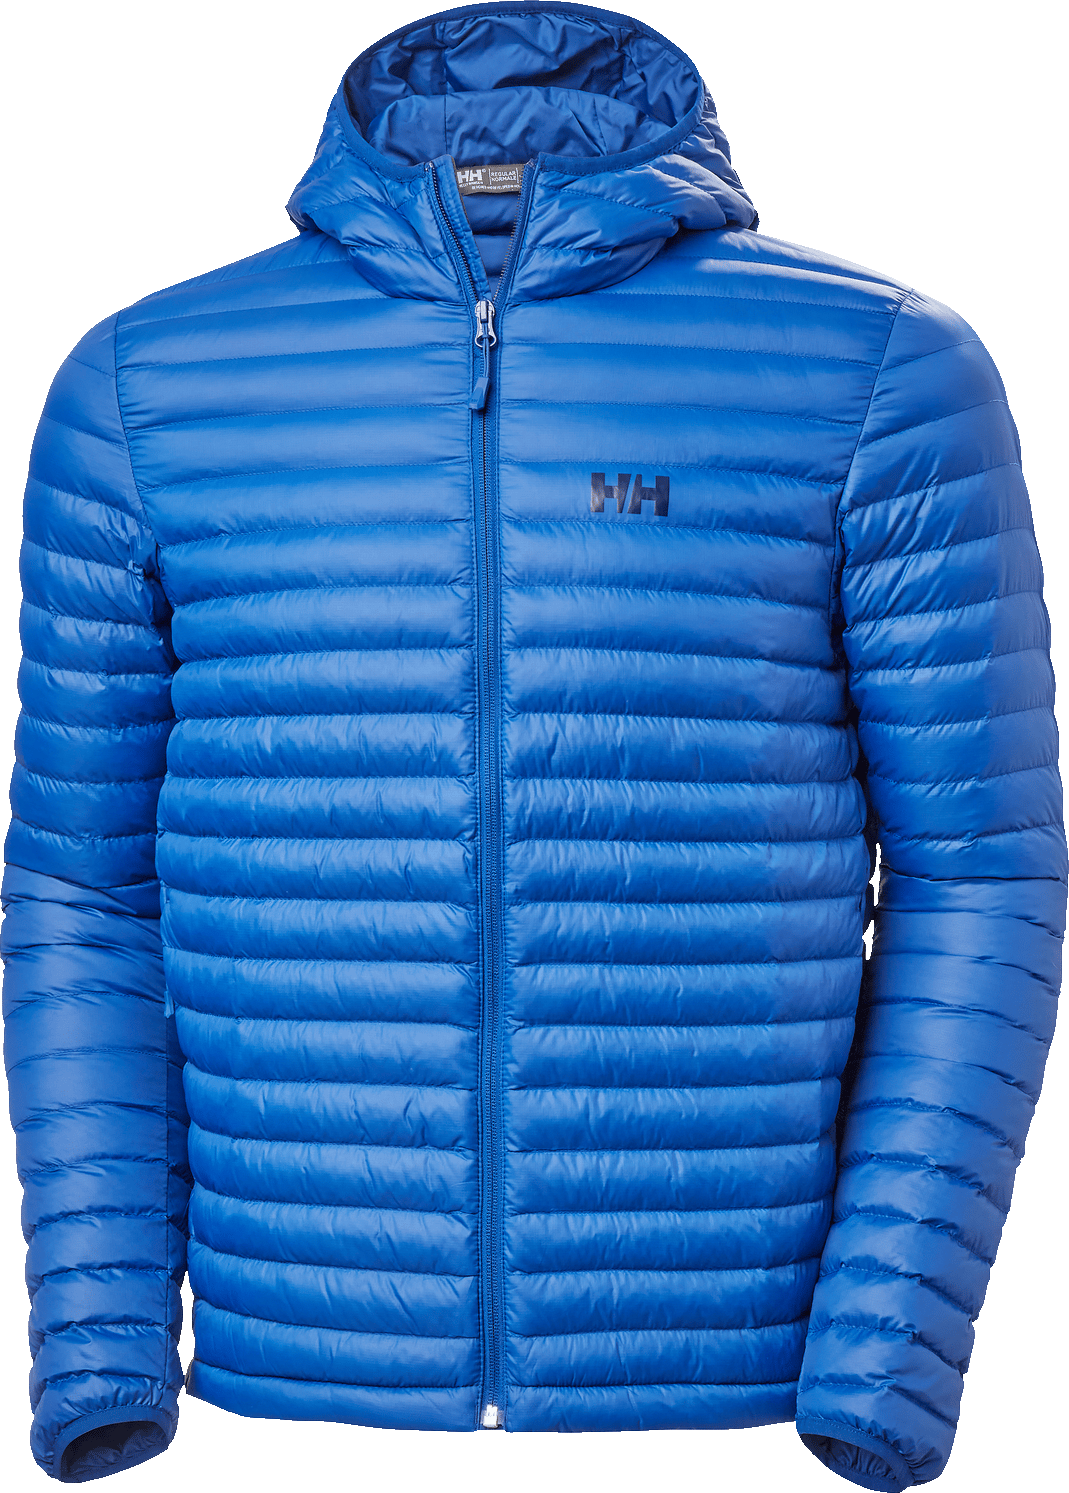 Men's Sirdal Hooded Insulated Jacket Deep Fjord